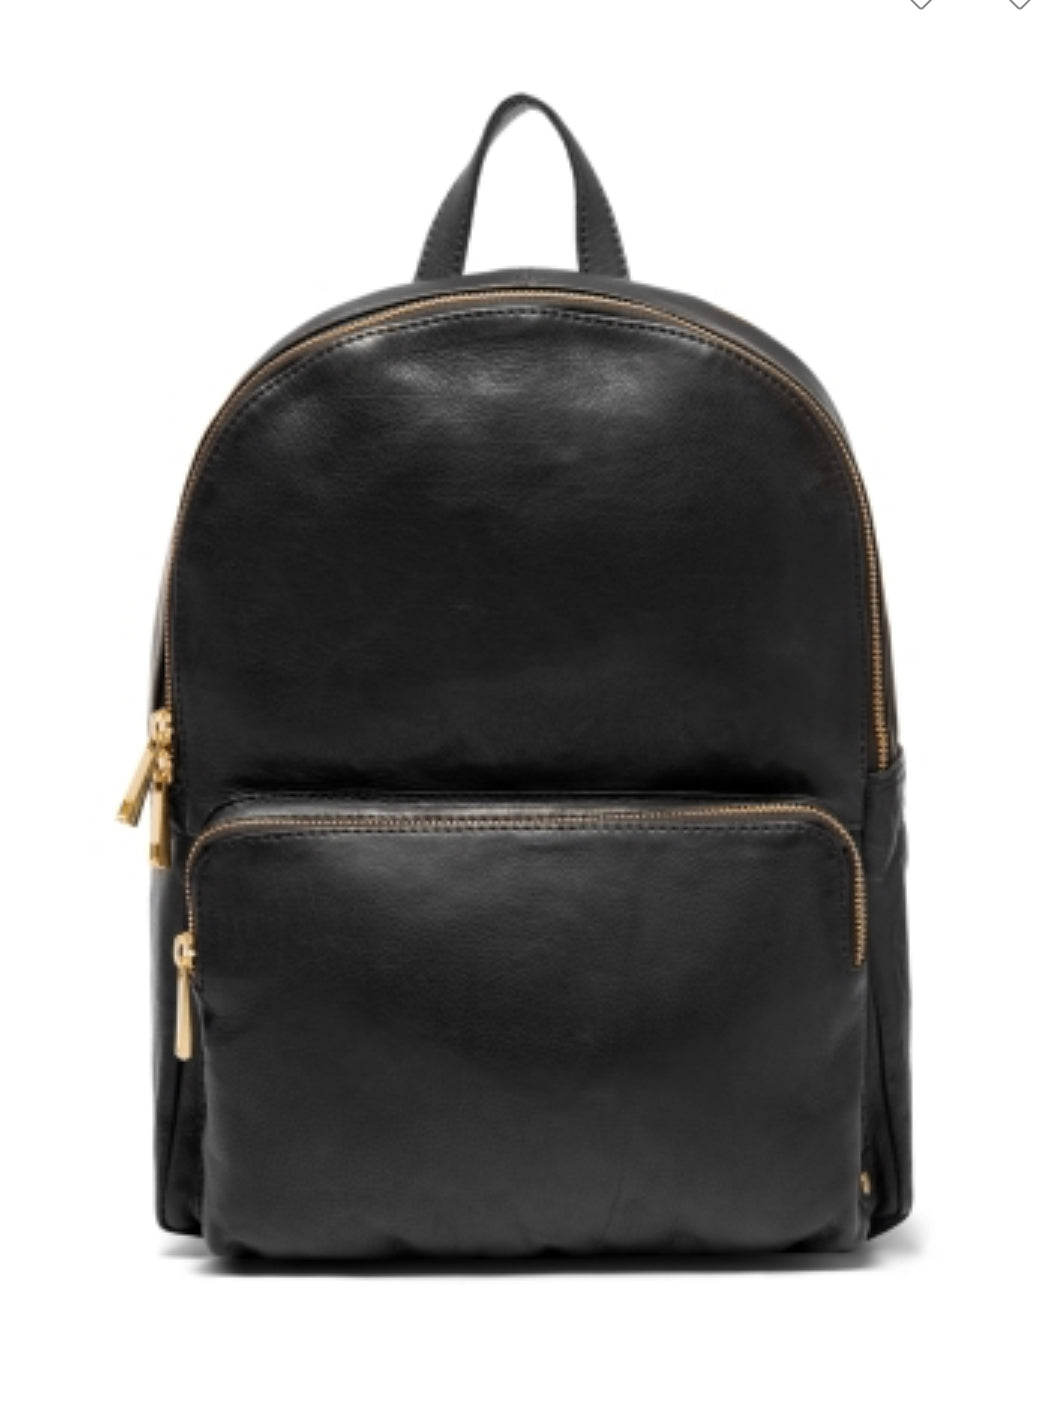 Depeche Leather Backpack